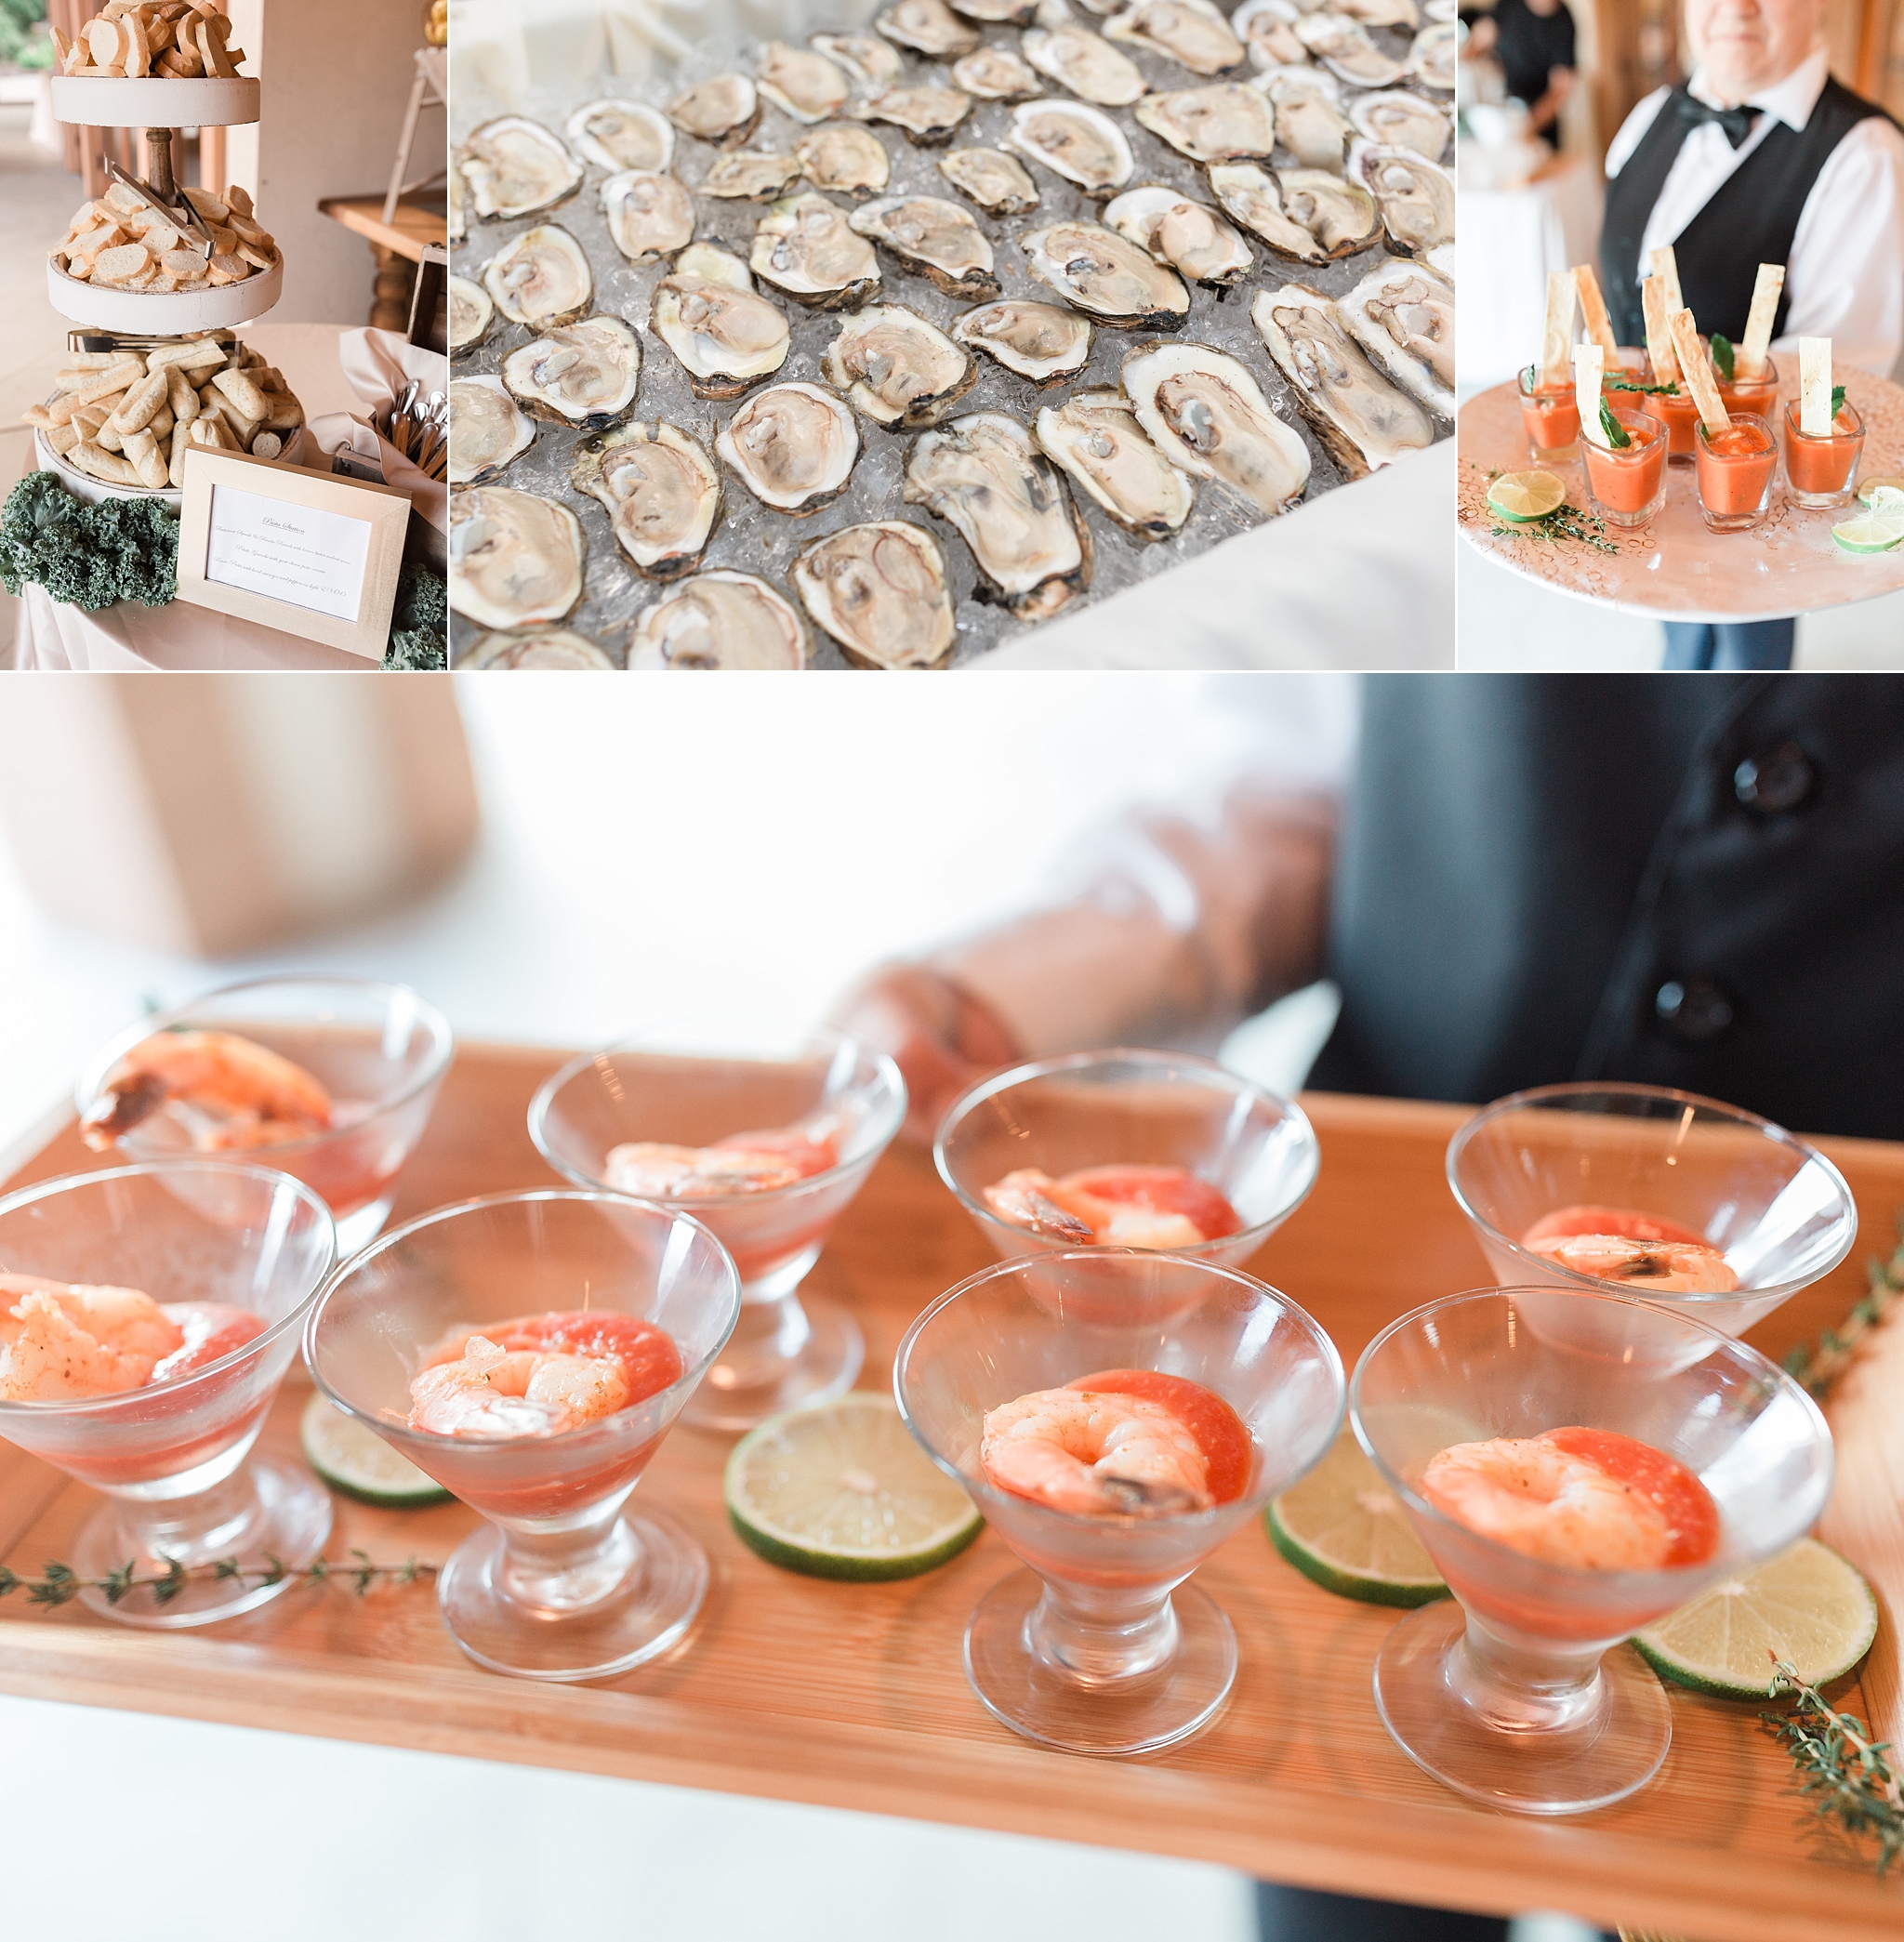 This Washington, DC wedding photographer discusses the pros and cons of five different catering options for the big day.